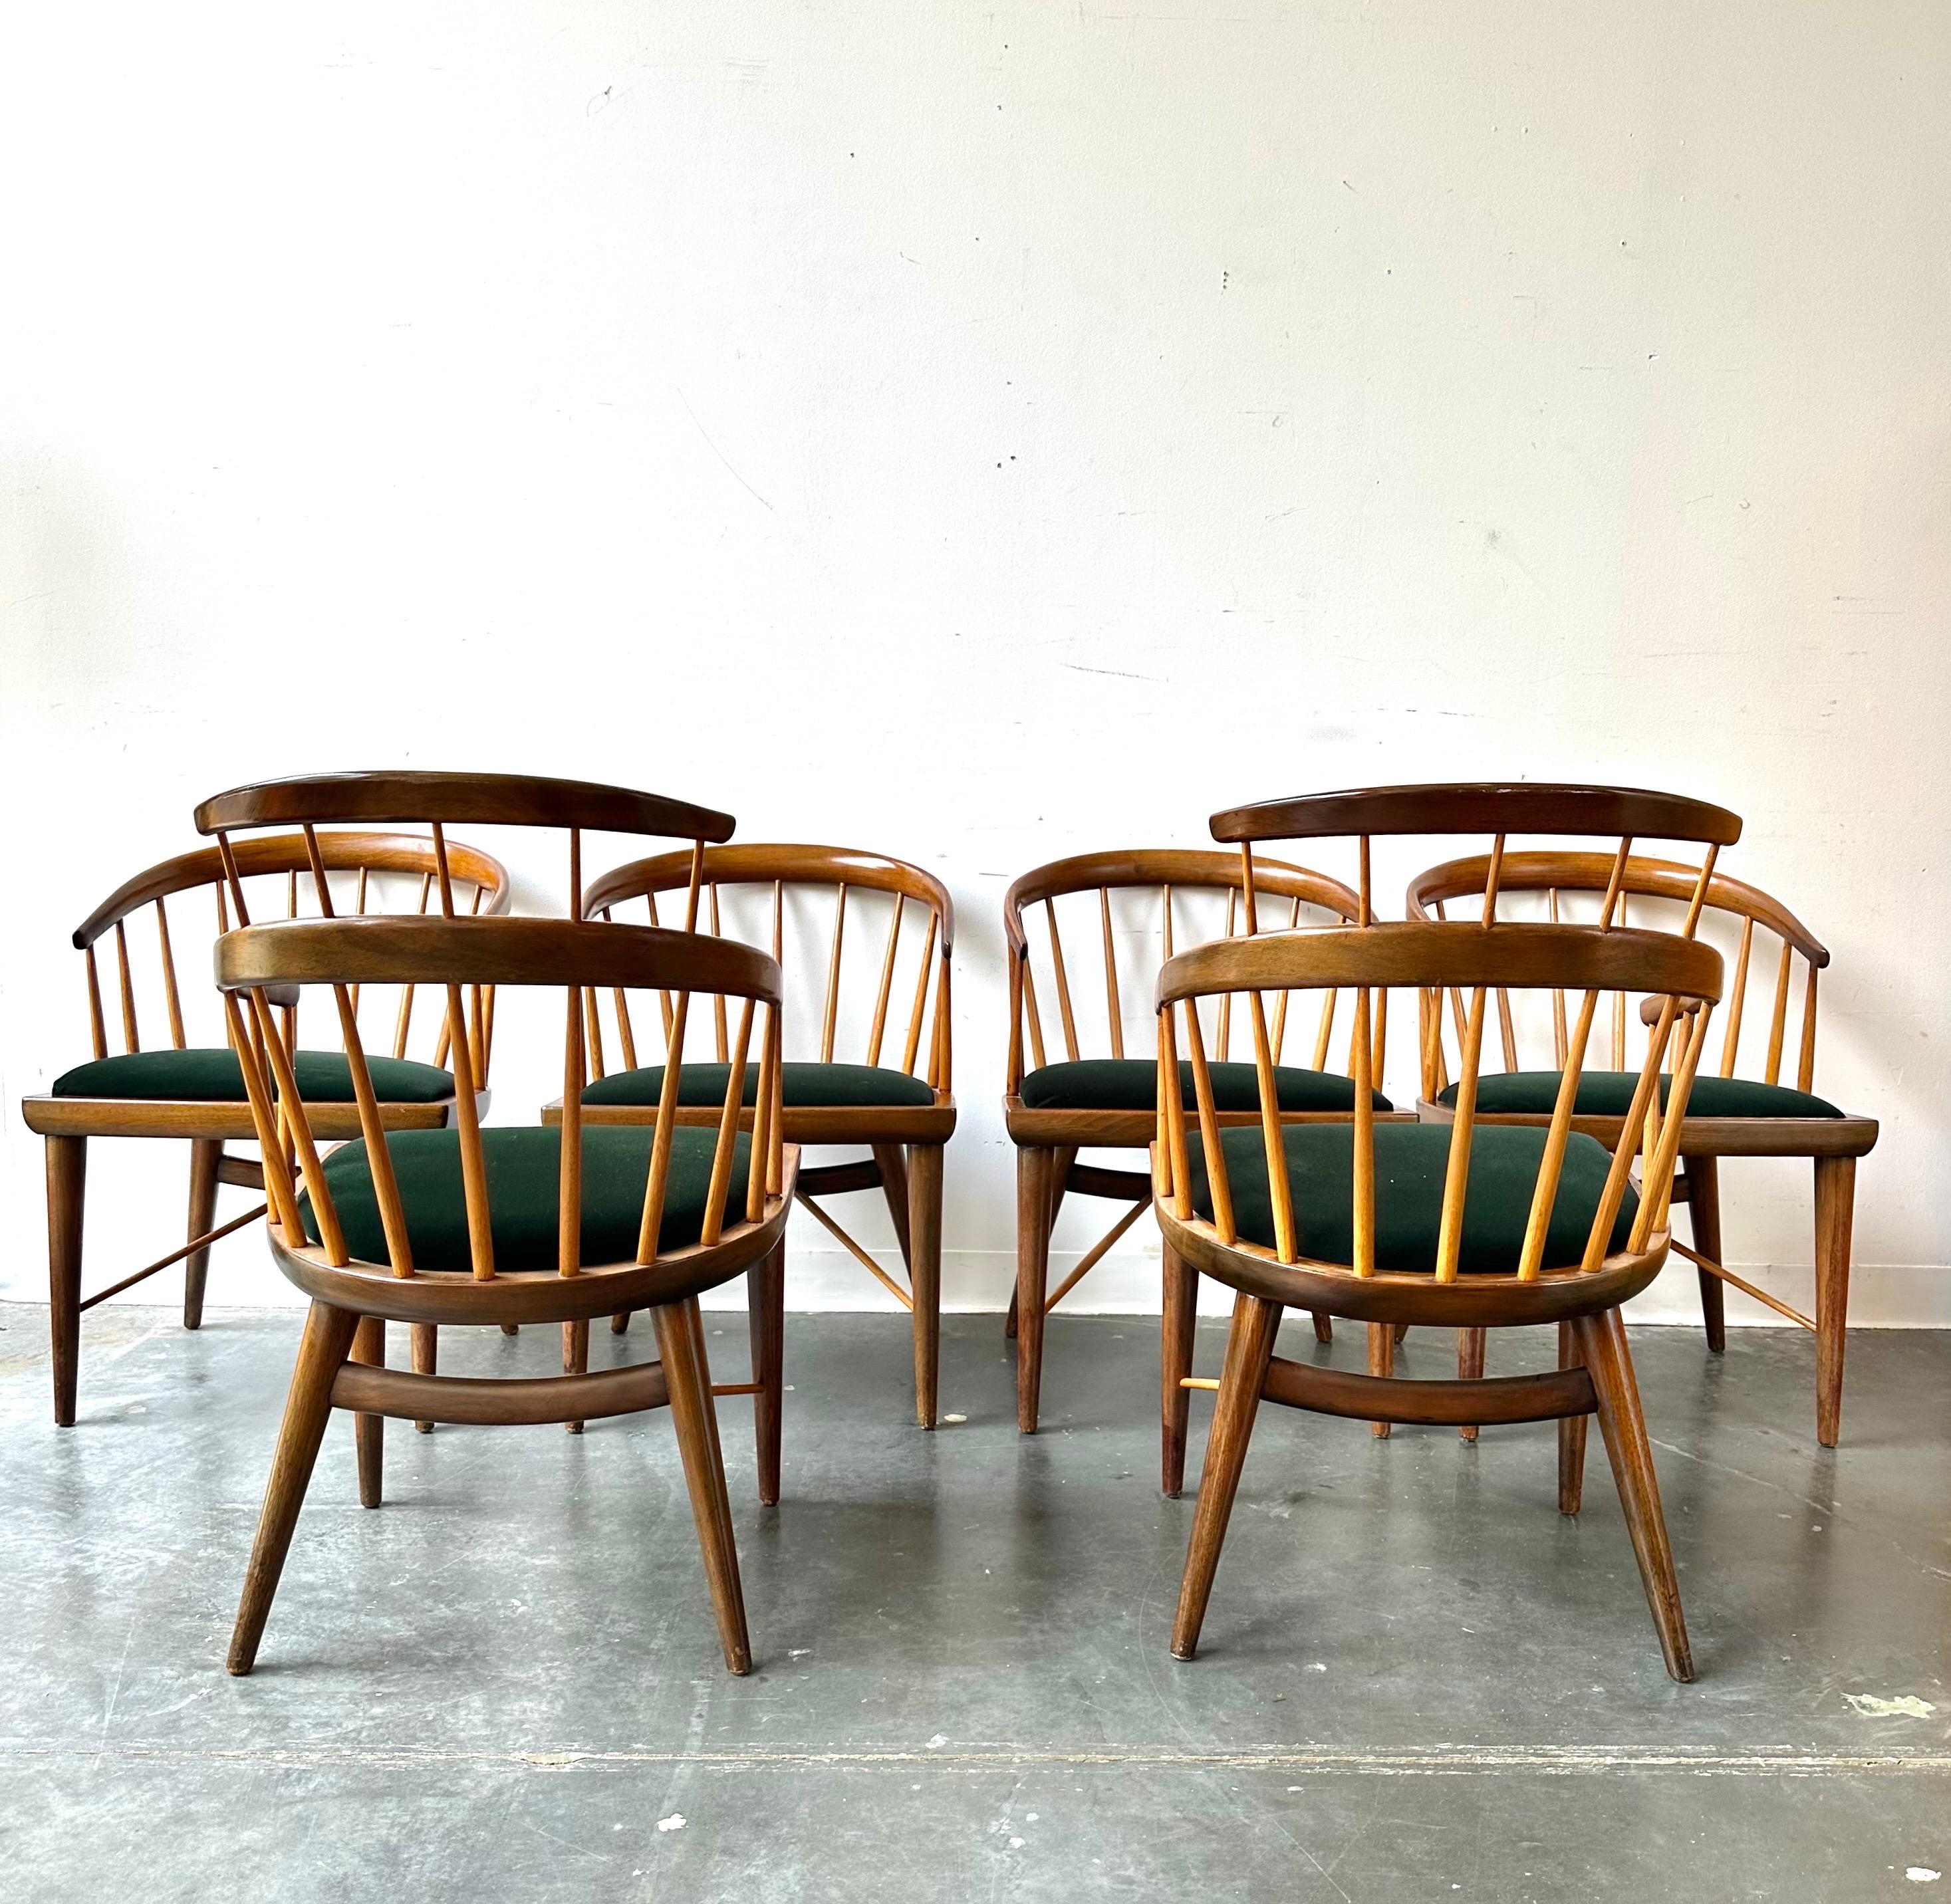 Barrel back dining chairs

In the manner of Paul Mccobb set of six chair dining with new green velvet upholstery.

Gorgeous look with some vintage wear.